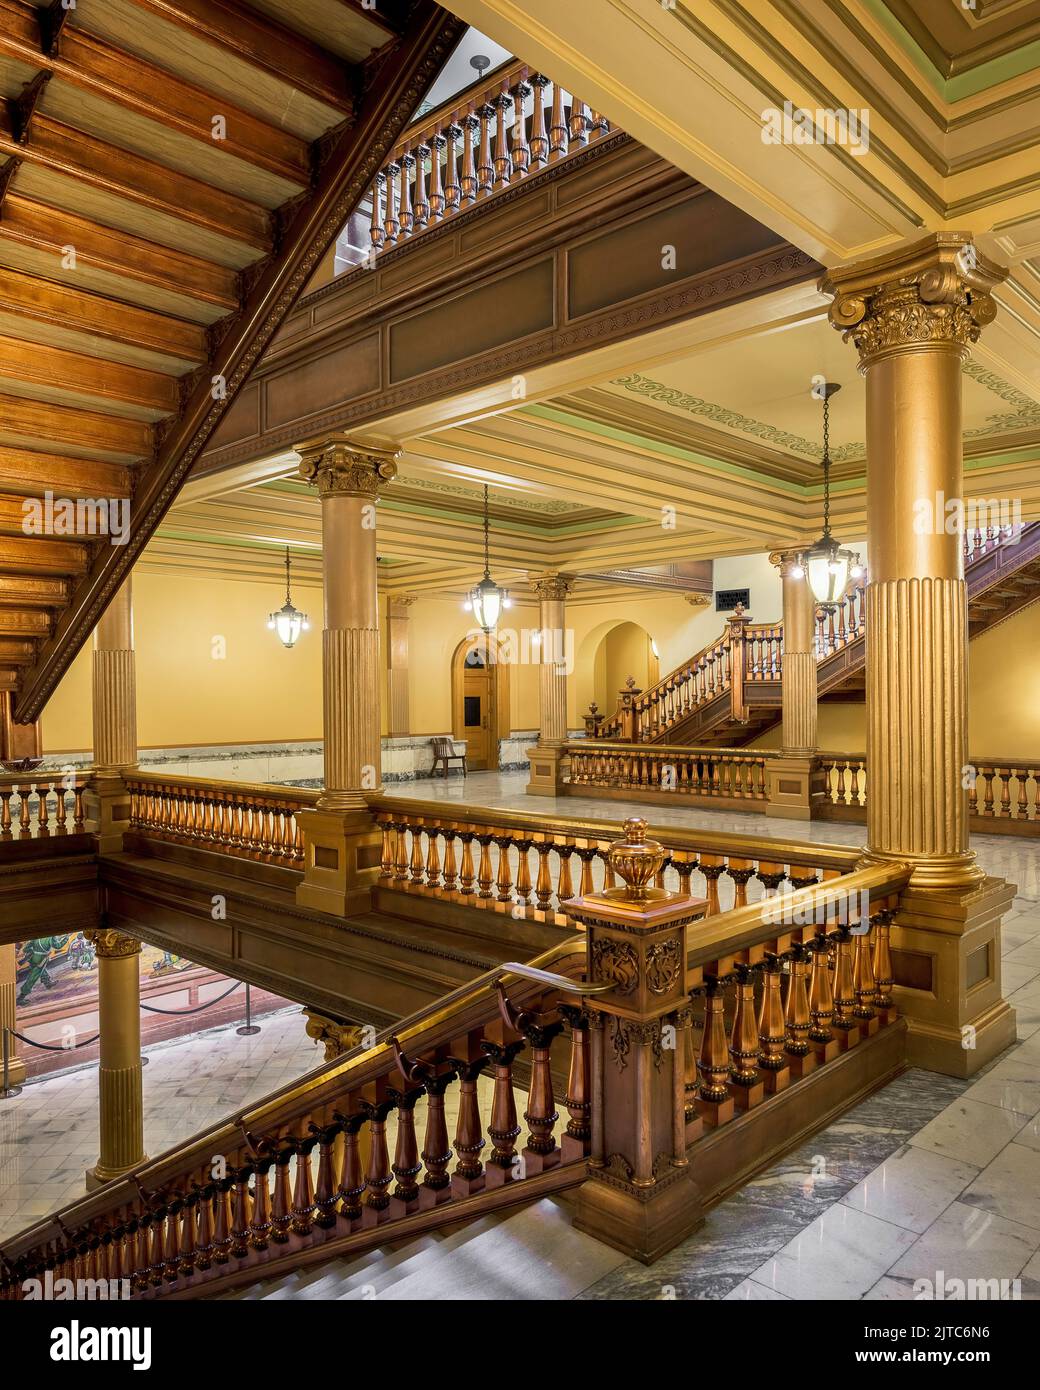 Staircase in the Kansas State Capitol building in Topeka, Kansas Stock Photo